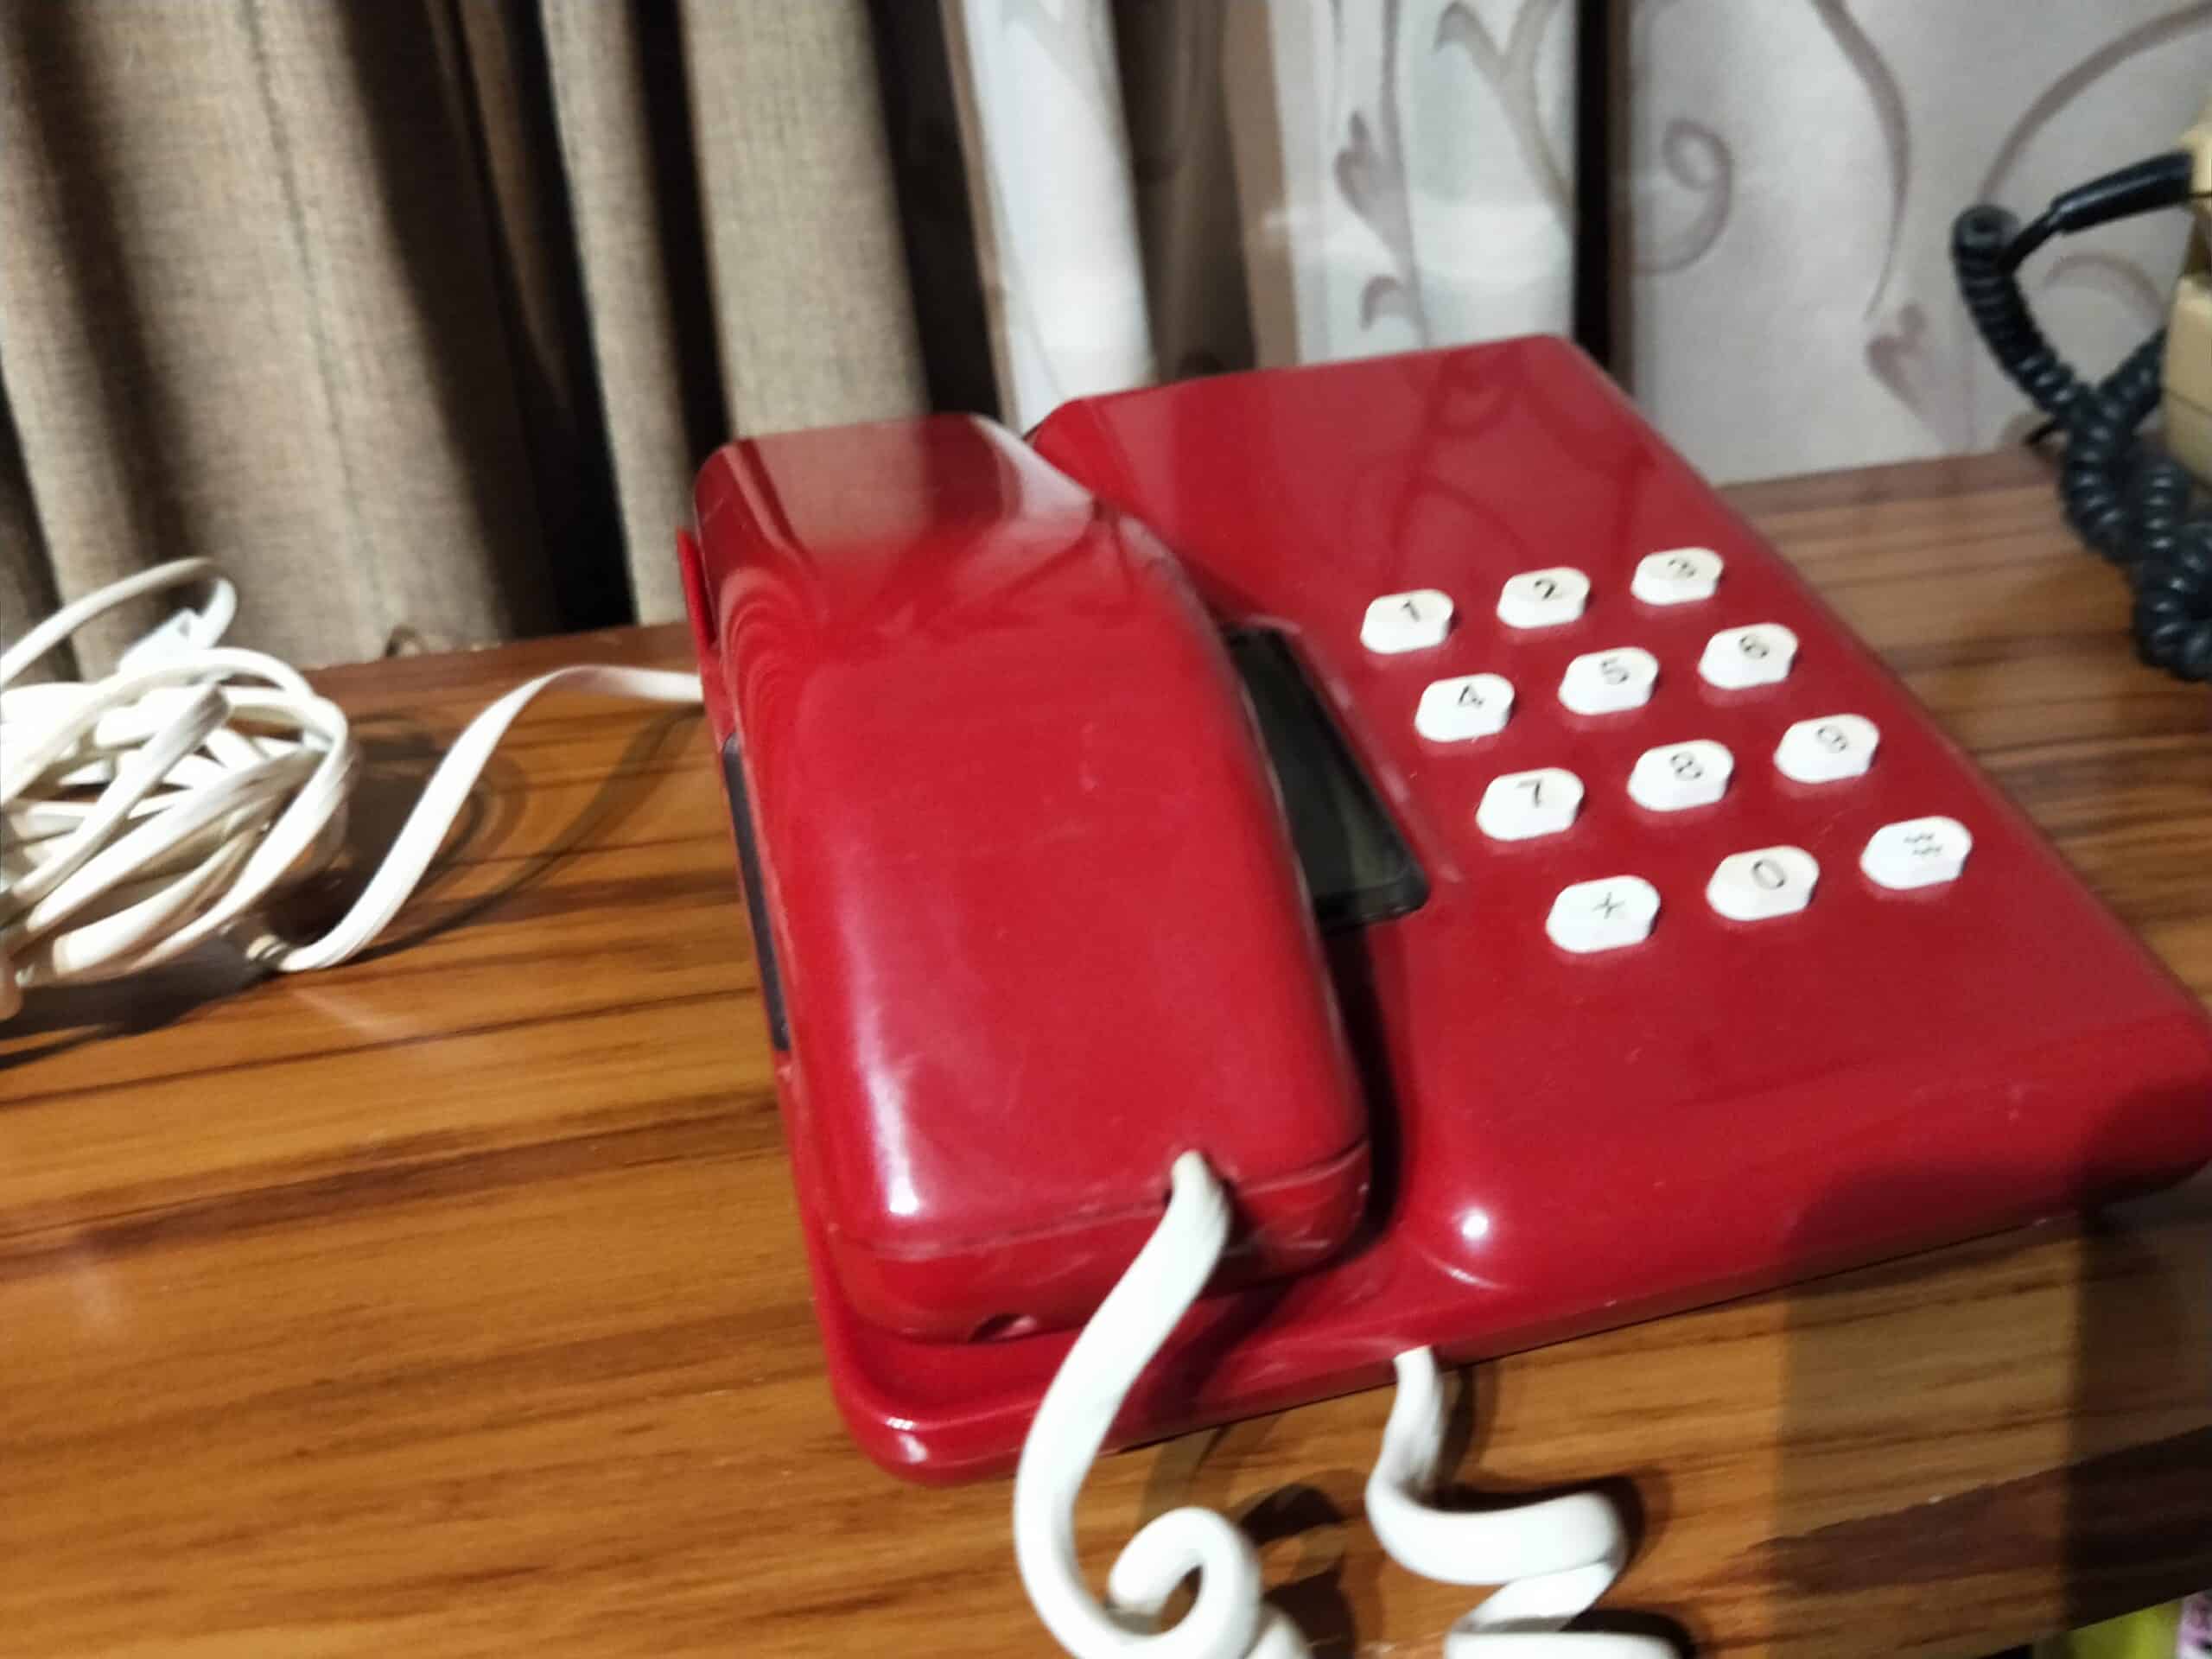 Red Pert phone excellent dials in tone